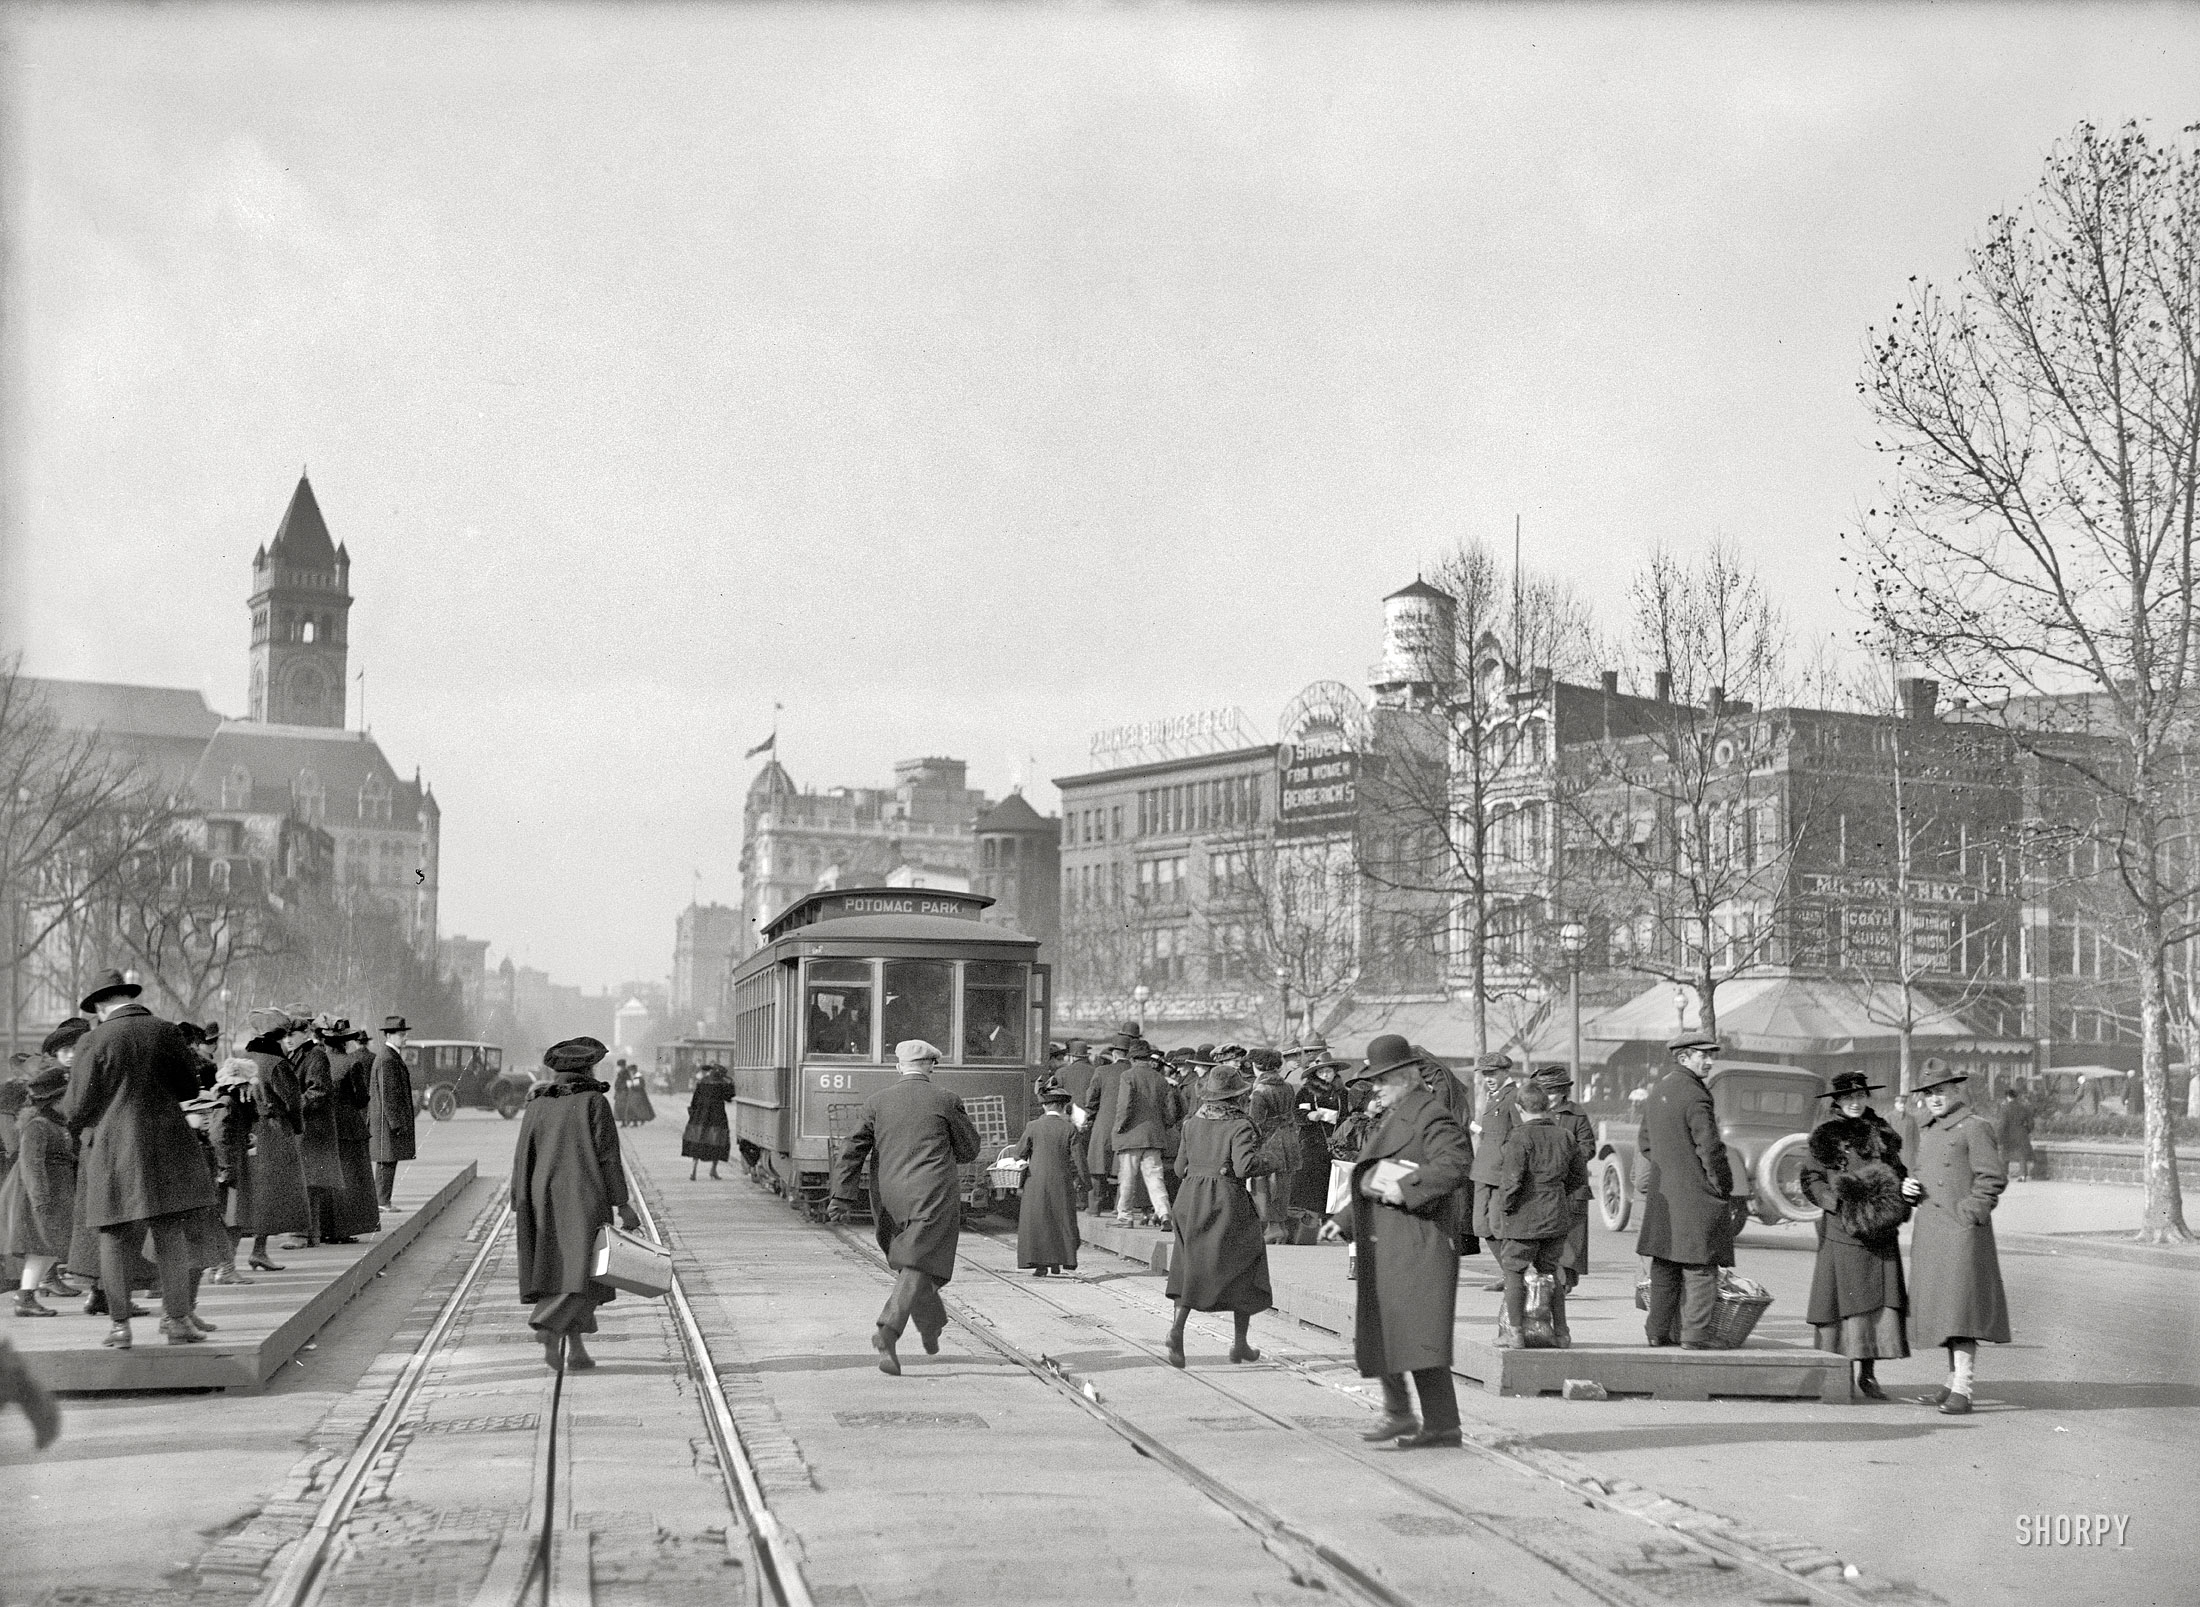 Washington, D.C., circa 1919. "Street scene, Pennsylvania Avenue." Here we see the tower of the Old Post Office as well as a number of vanished Washington landmarks including the Parker Bridget department store. View full size.